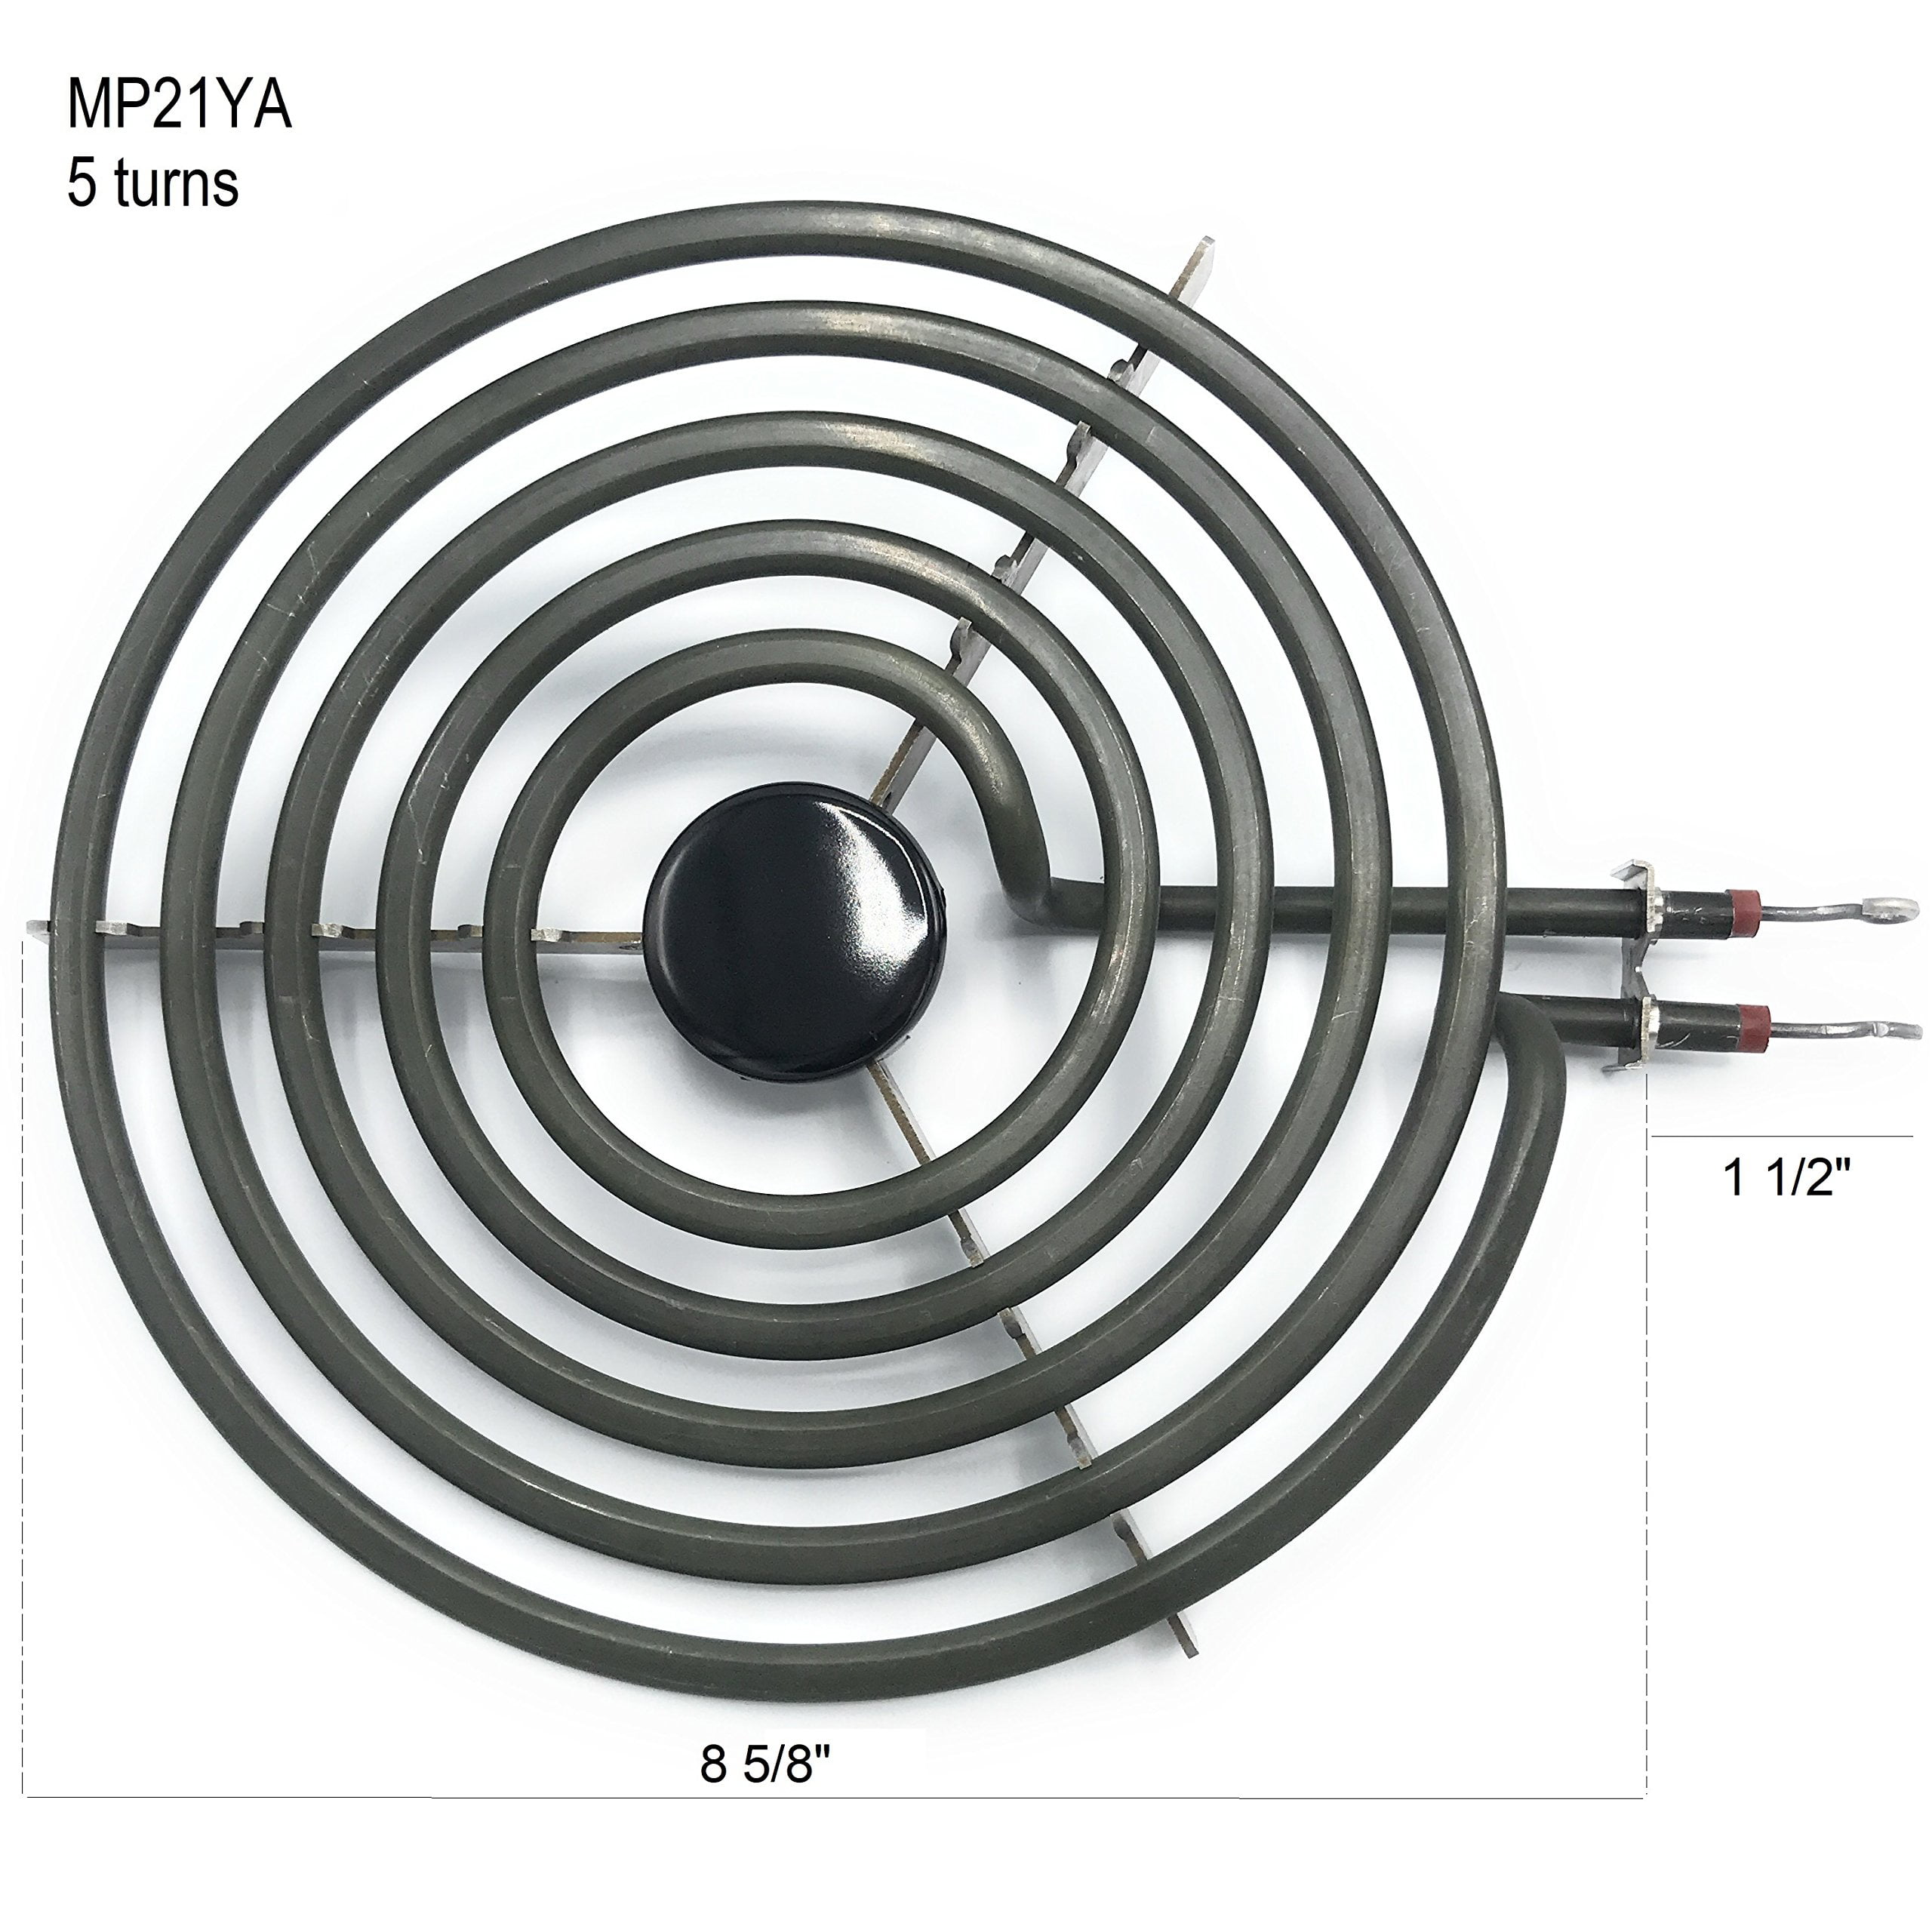 MP15YA 6 Electric Range Burner Element & 8 MP21YA Electric Stove Burner Replacement for Hard-wick & Ken-more & May-tag & Nor-ge & Whirlpool Electric Range Stove Fit MP22YA Range Stove Burner 